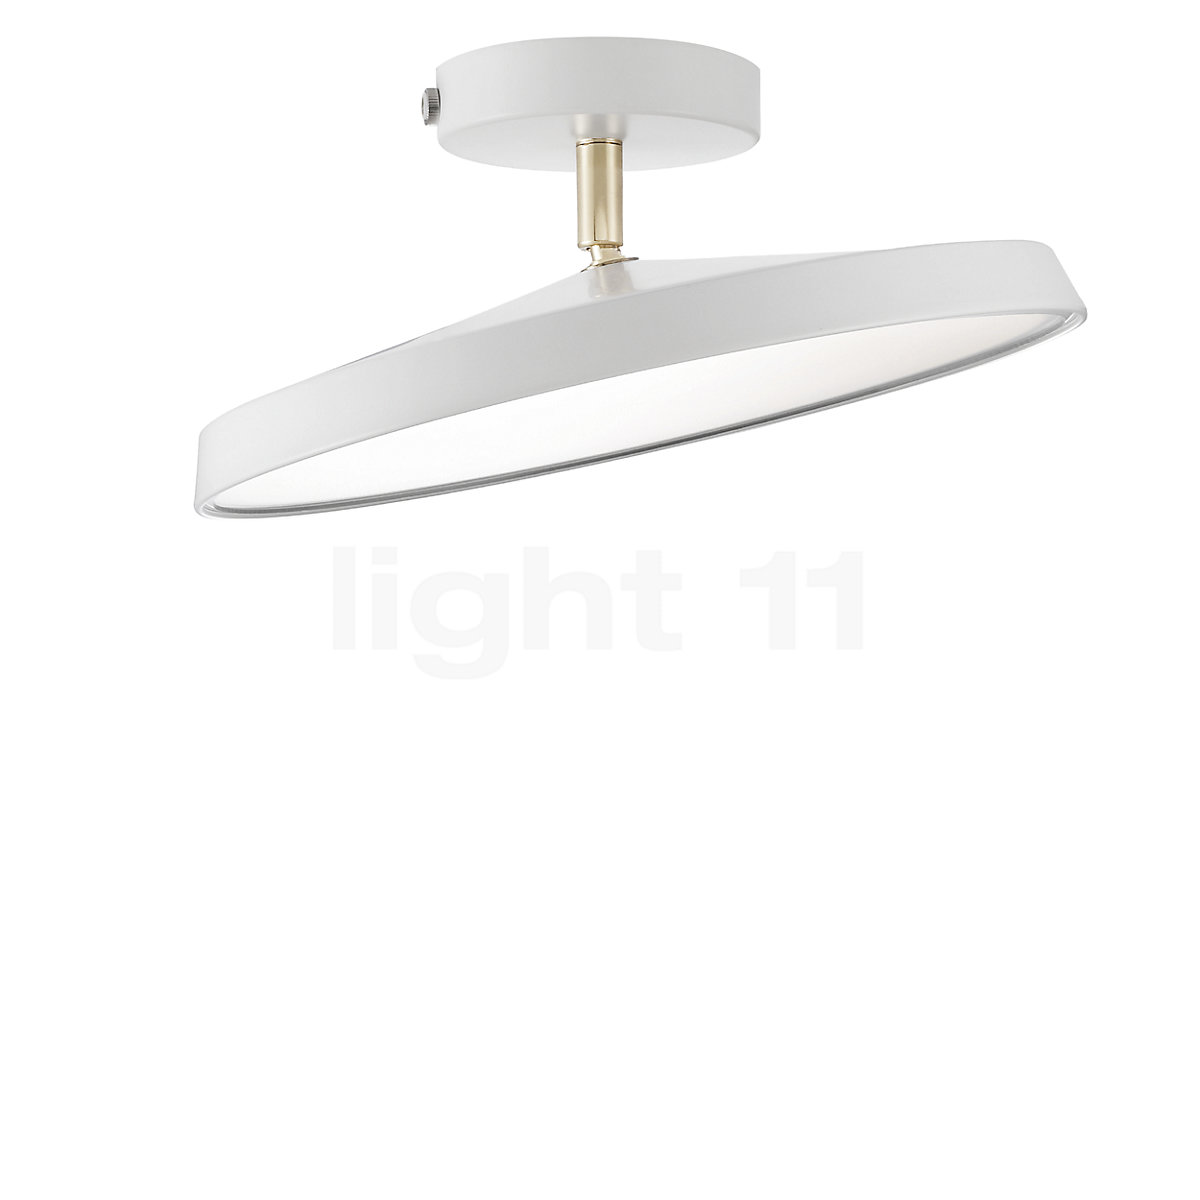 Buy Design for at LED the Ceiling People Pro Kaito Light